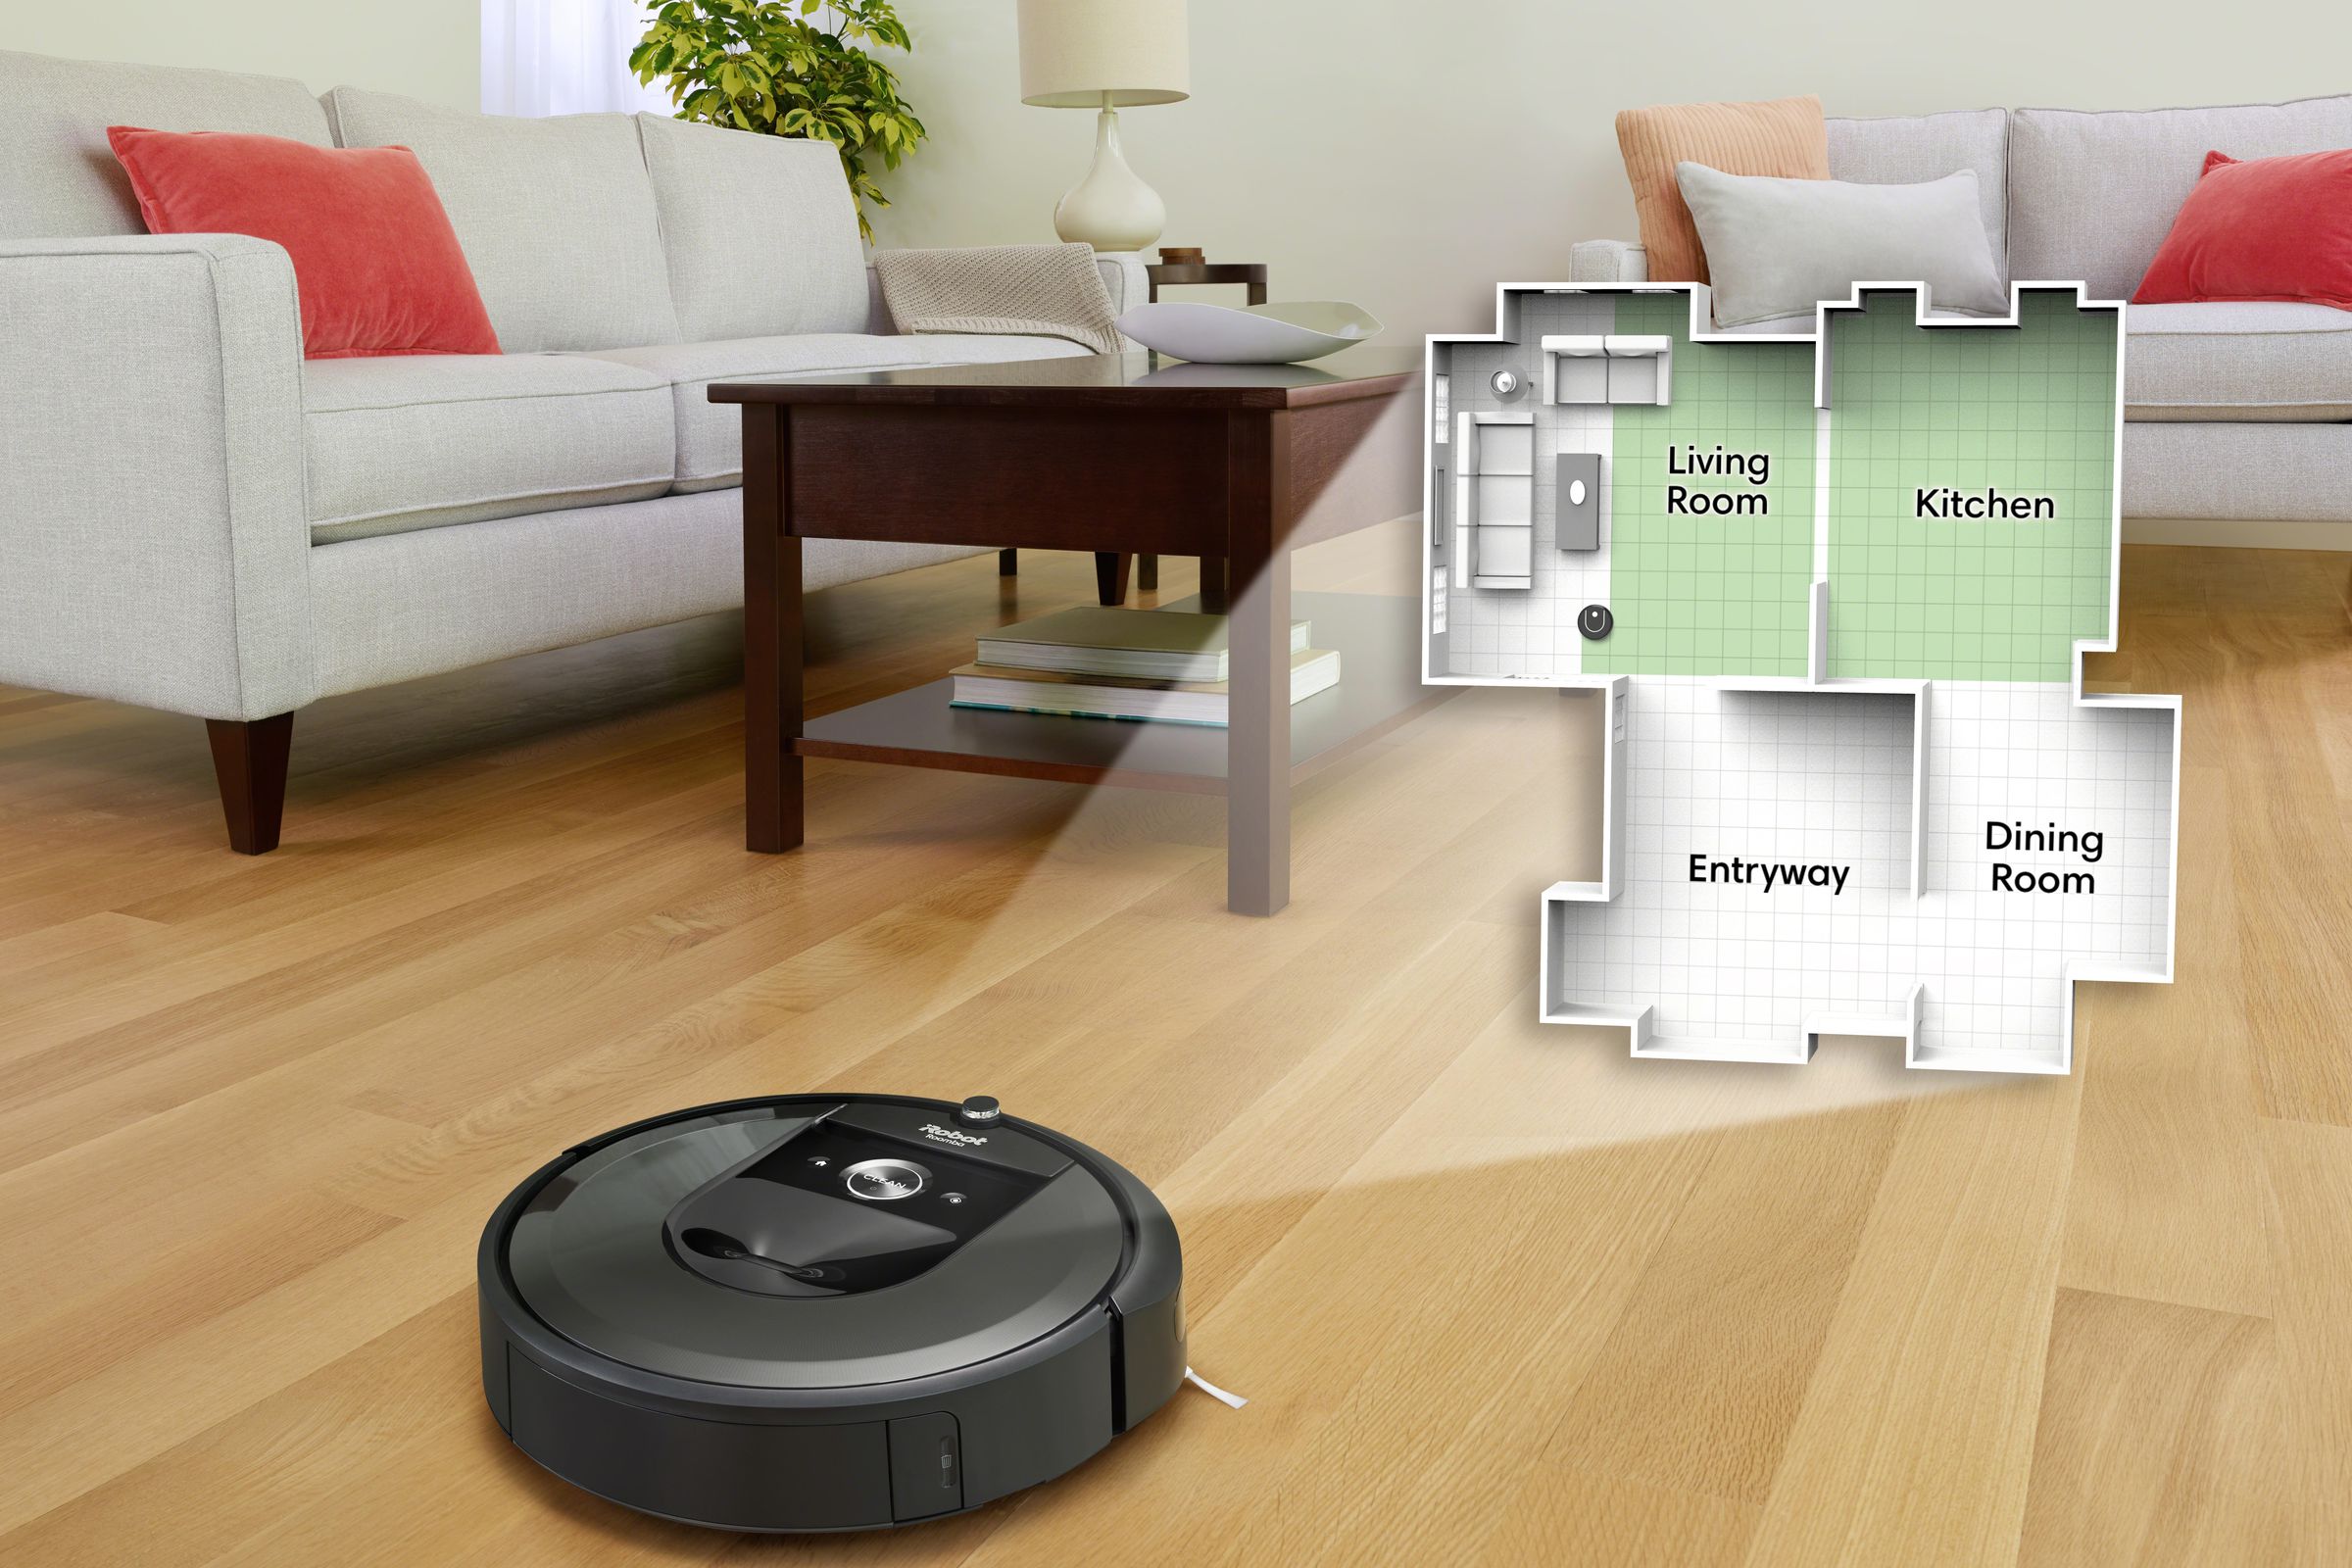 Roomba’s i7+ robovac maps users’ homes to let them customize the cleaning schedule.